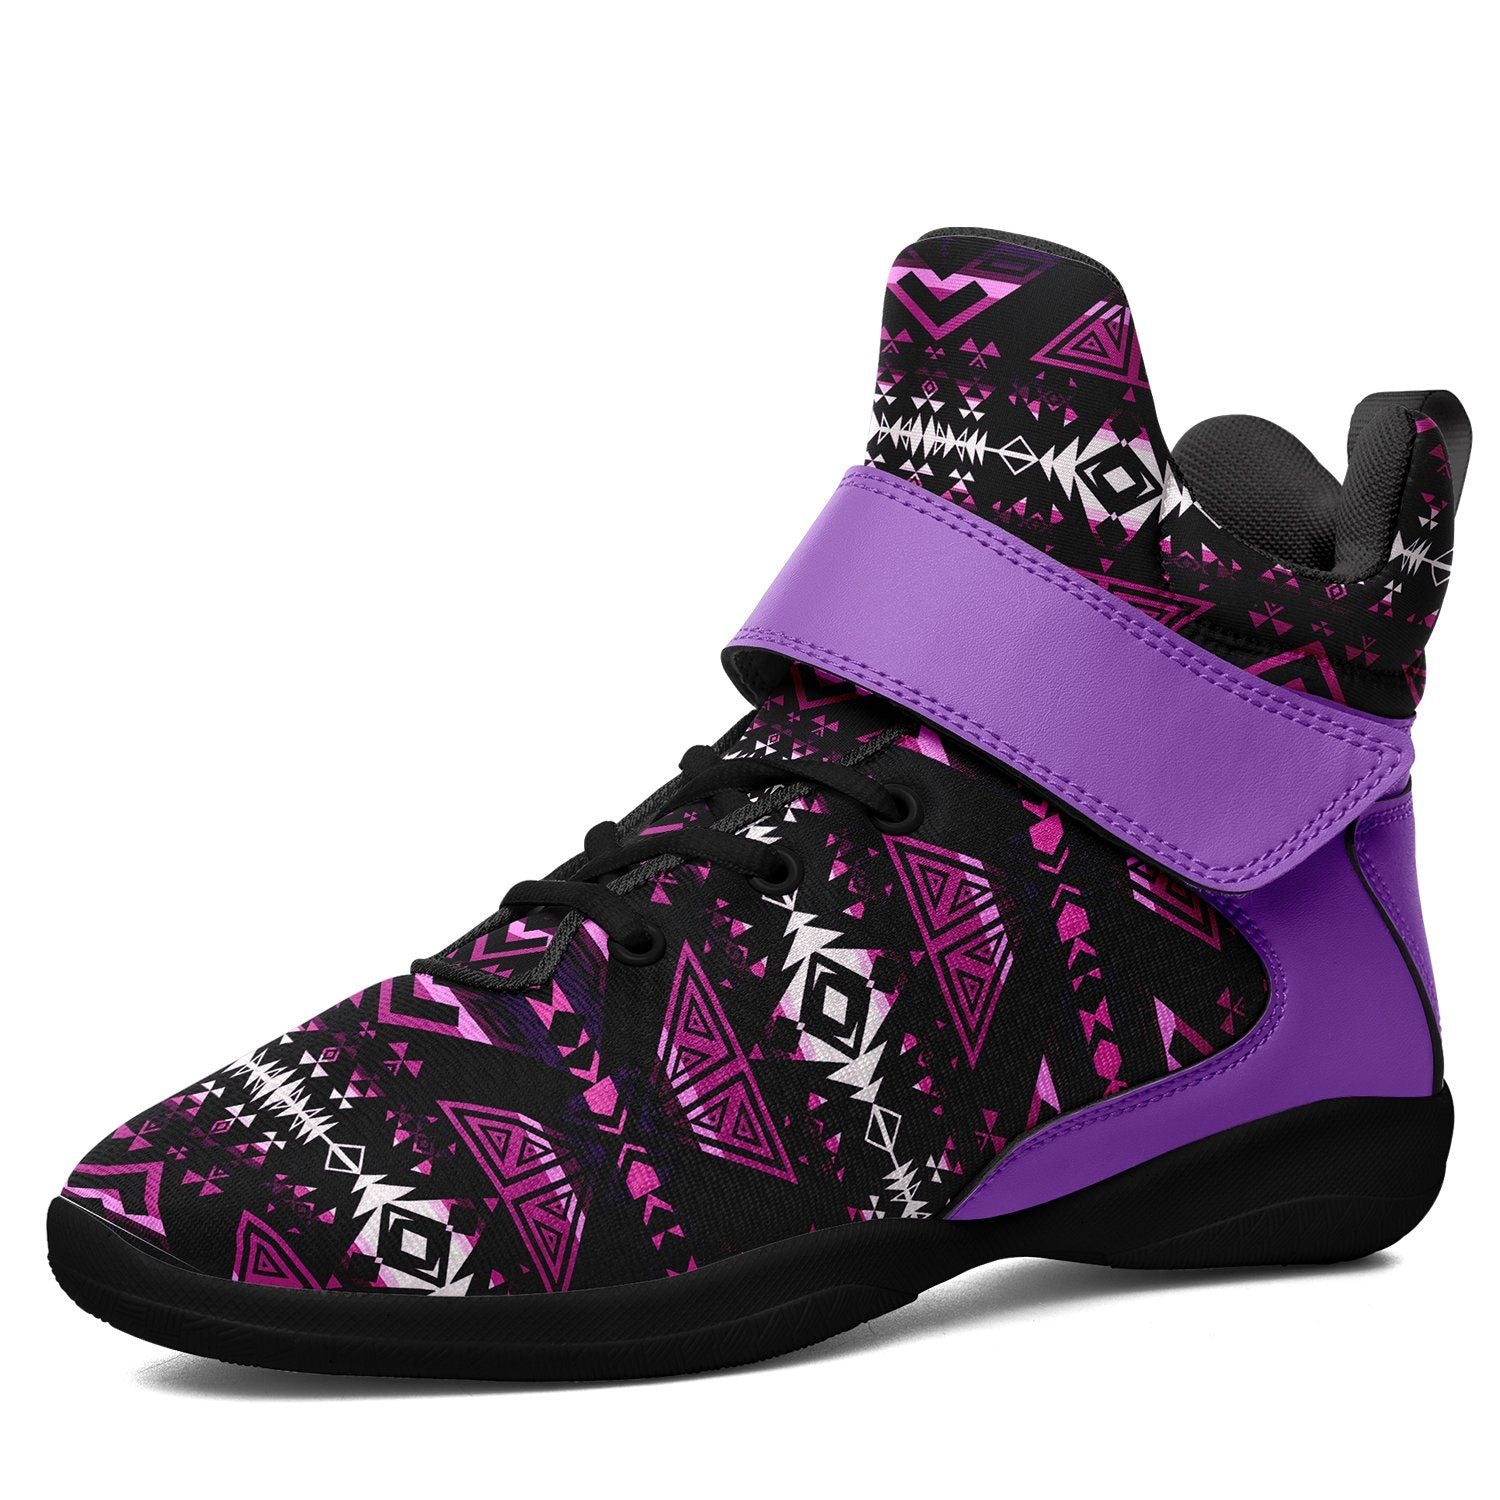 Upstream Expedition Moonlight Shadows Ipottaa Basketball / Sport High Top Shoes 49 Dzine US Women 4.5 / US Youth 3.5 / EUR 35 Black Sole with Lavender Strap 